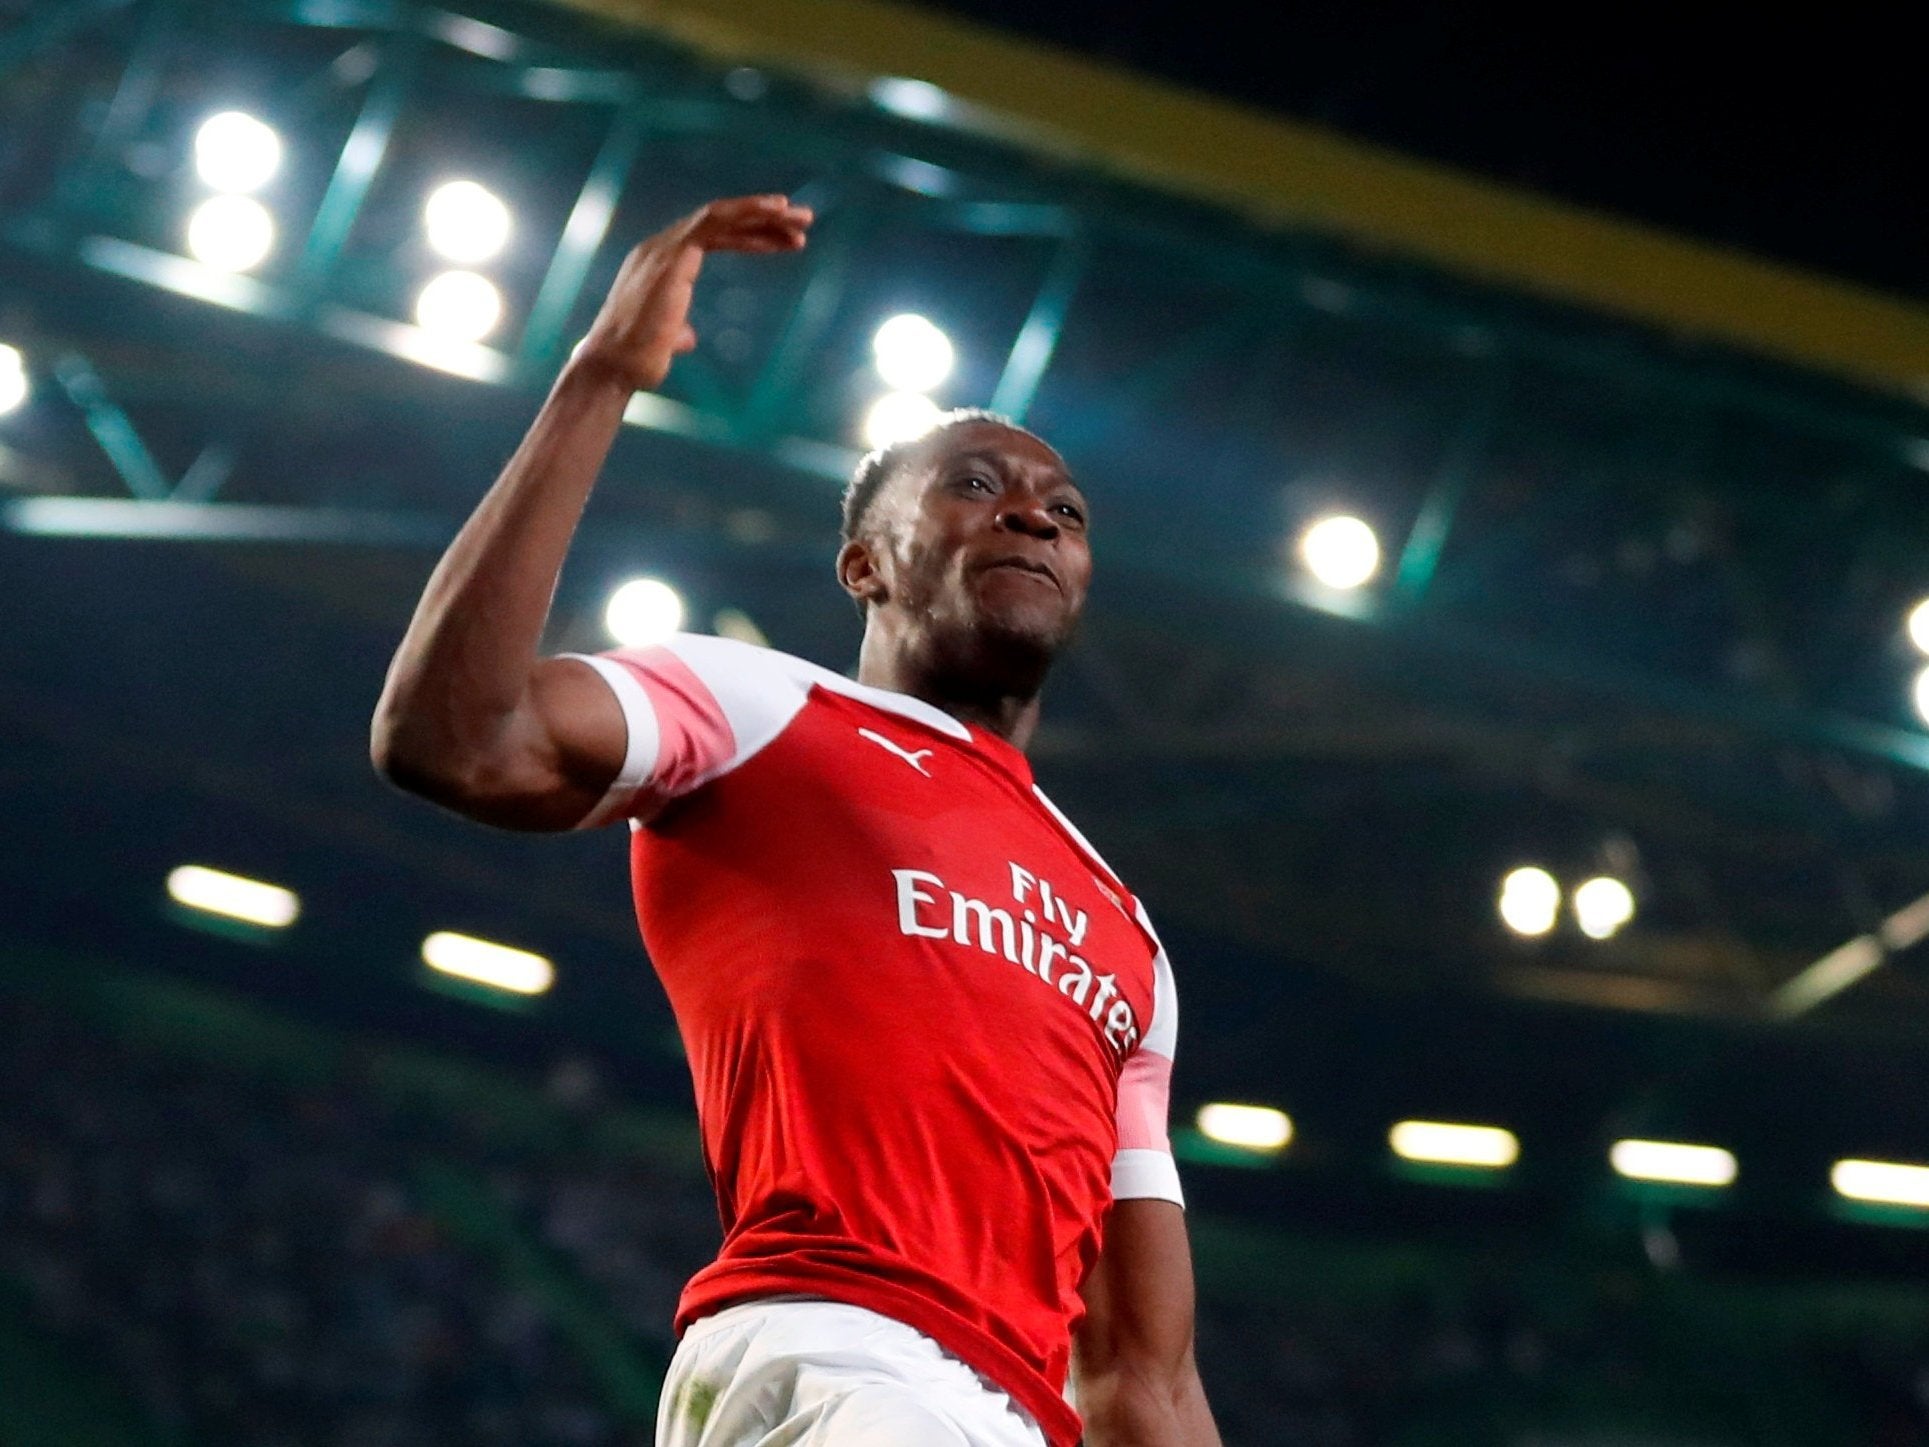 Sporting vs Arsenal player ratings: Danny Welbeck and Aaron Ramsey impress in Europa League win